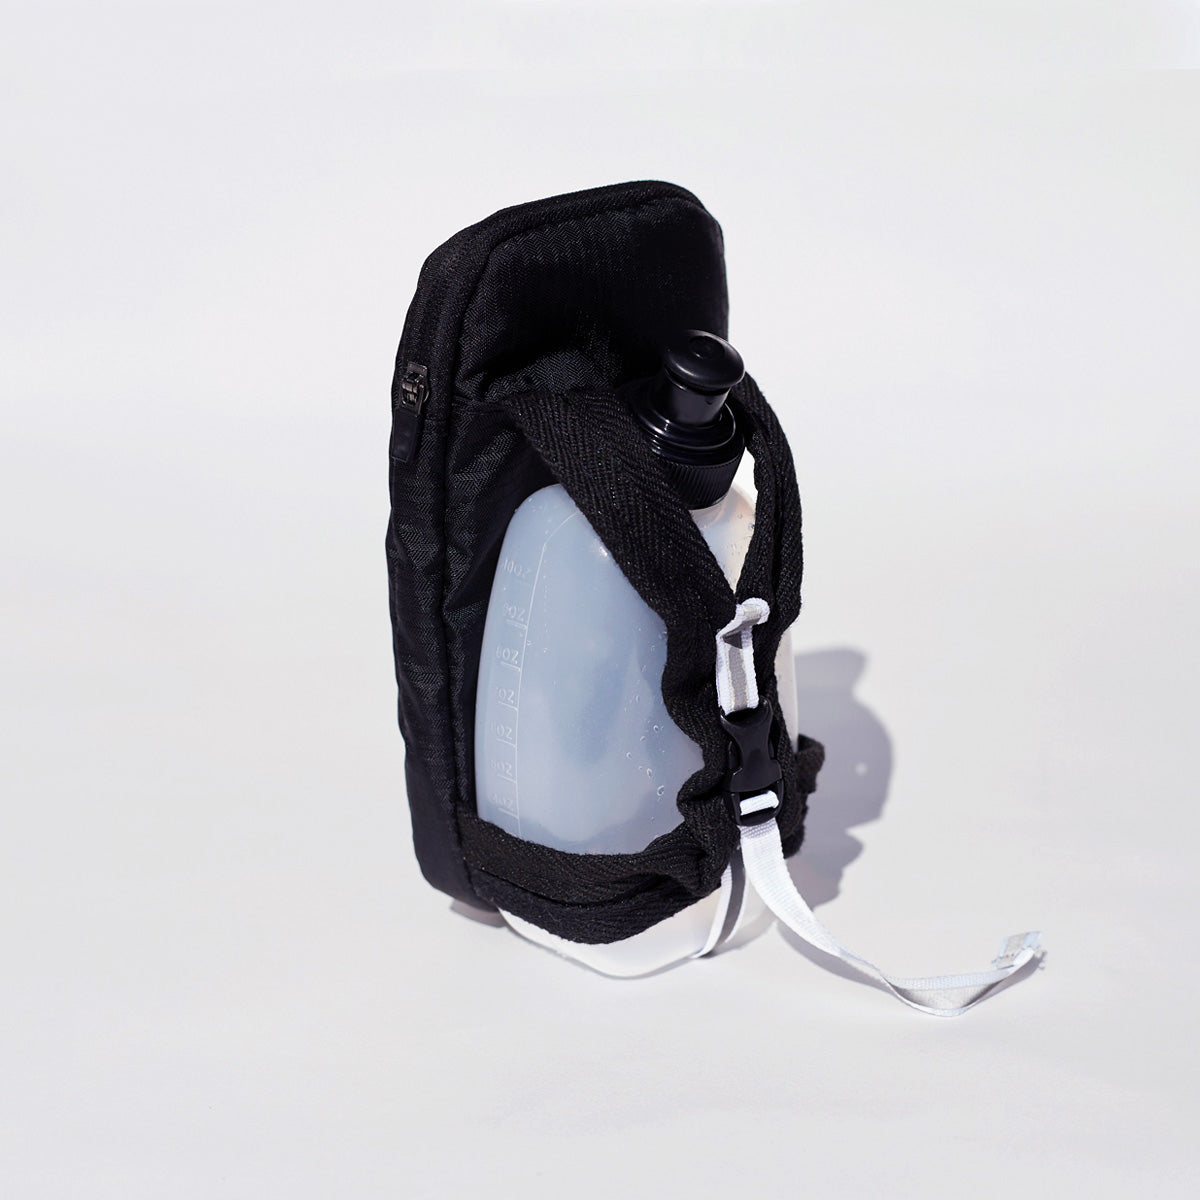 Water Bottle Travel Case with Strap